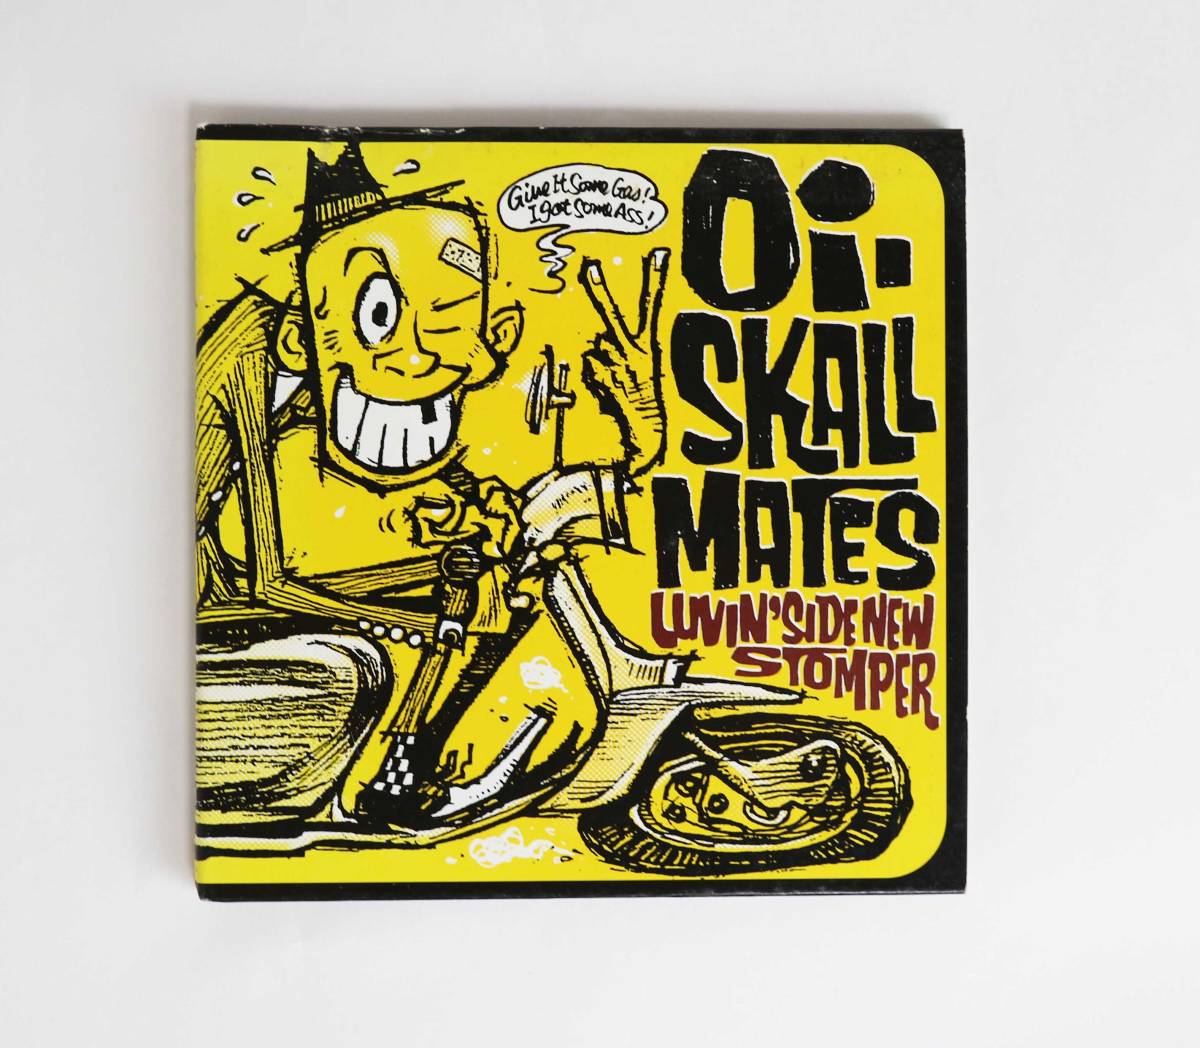 Oi-SKALL MATES LUVIN' SIDE NEW STOMPER 【75%OFF!】